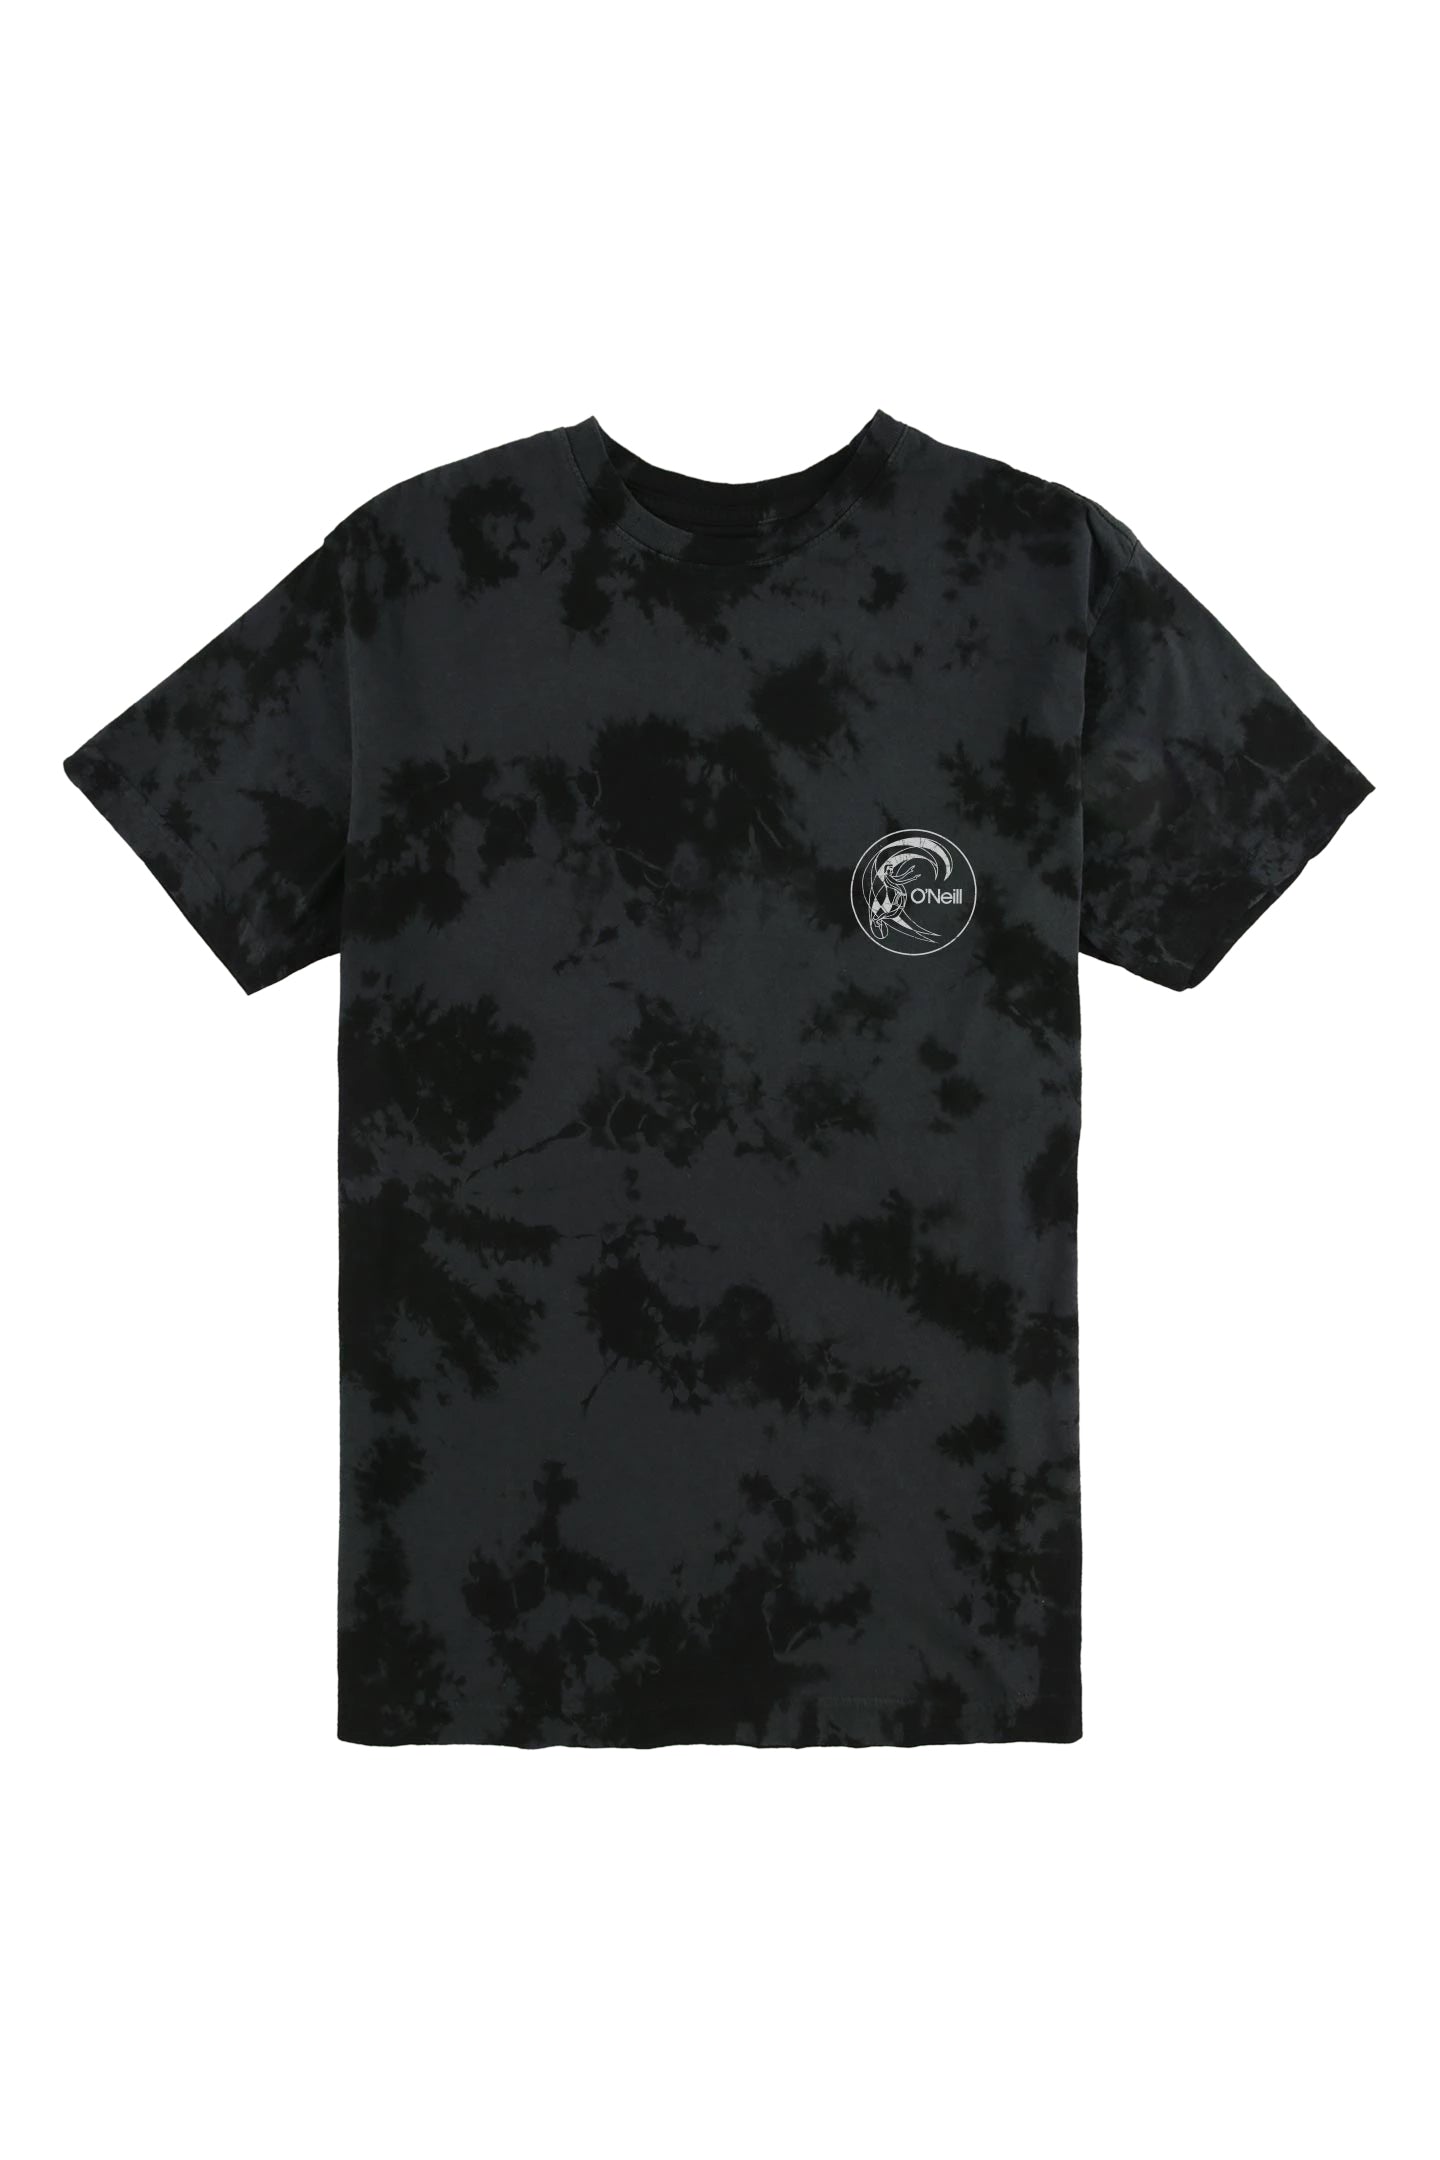 O'neill Psyched Tee DCH-DarkCharcoal S